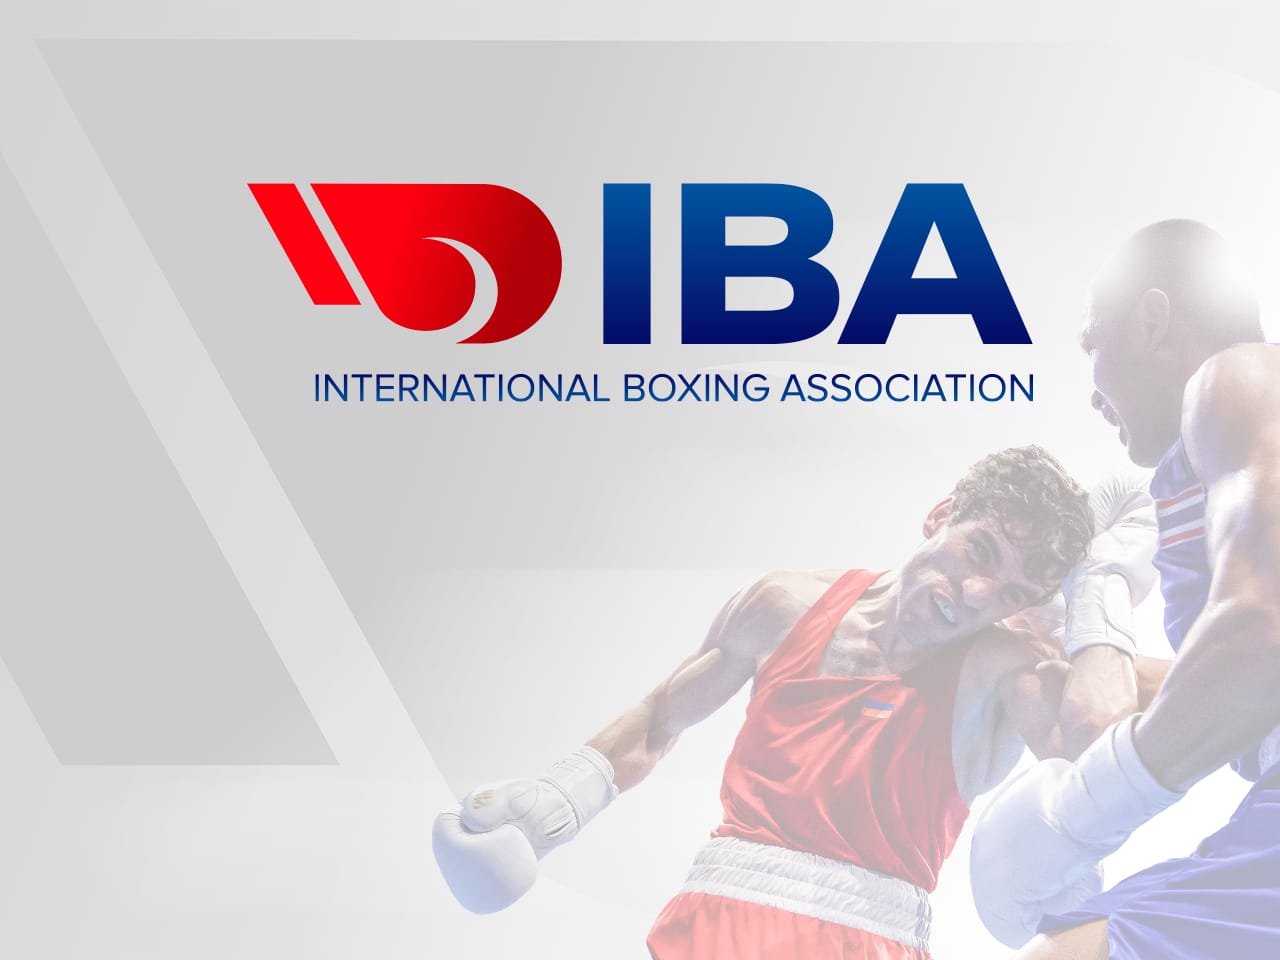 IBA President Umar Kremlev: The IOC should give green light to all athletes to compete – IBA